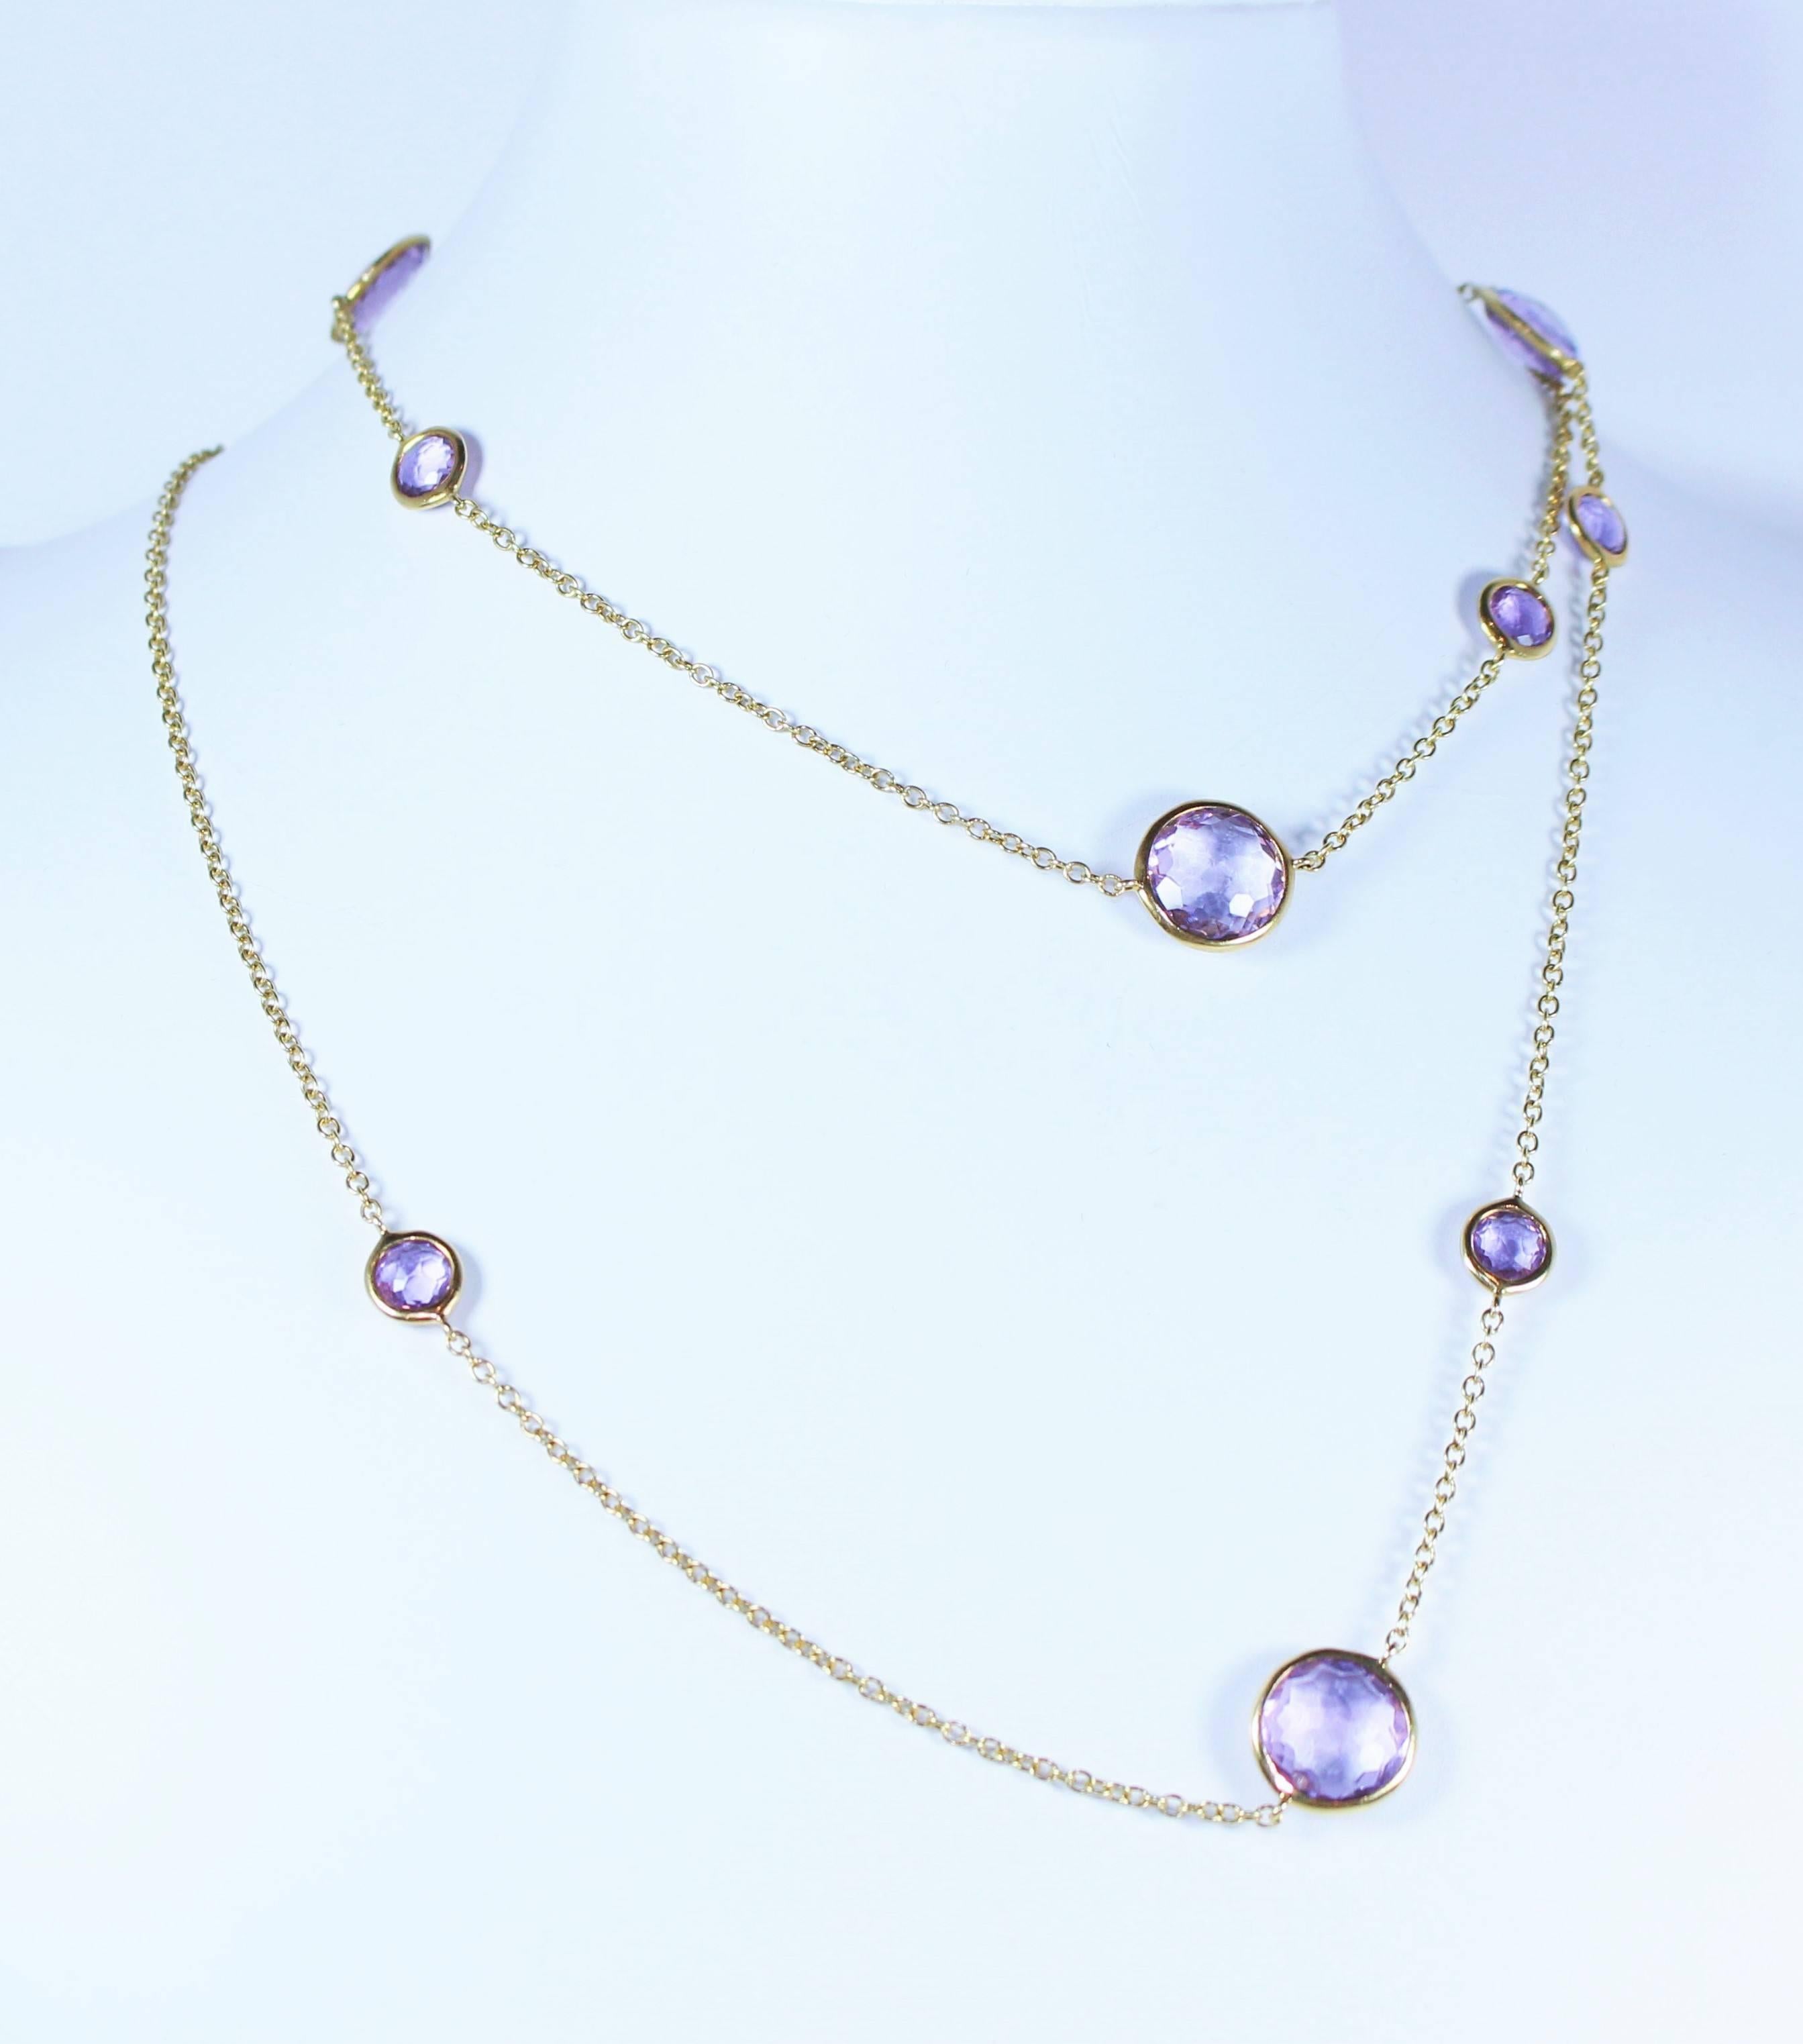 This necklace is composed of 18kt yellow gold with faceted Amethyst stones. Can be worn single or doubled. In excellent condition.

Specs: 
18KT Yellow Gold
Length: 36"